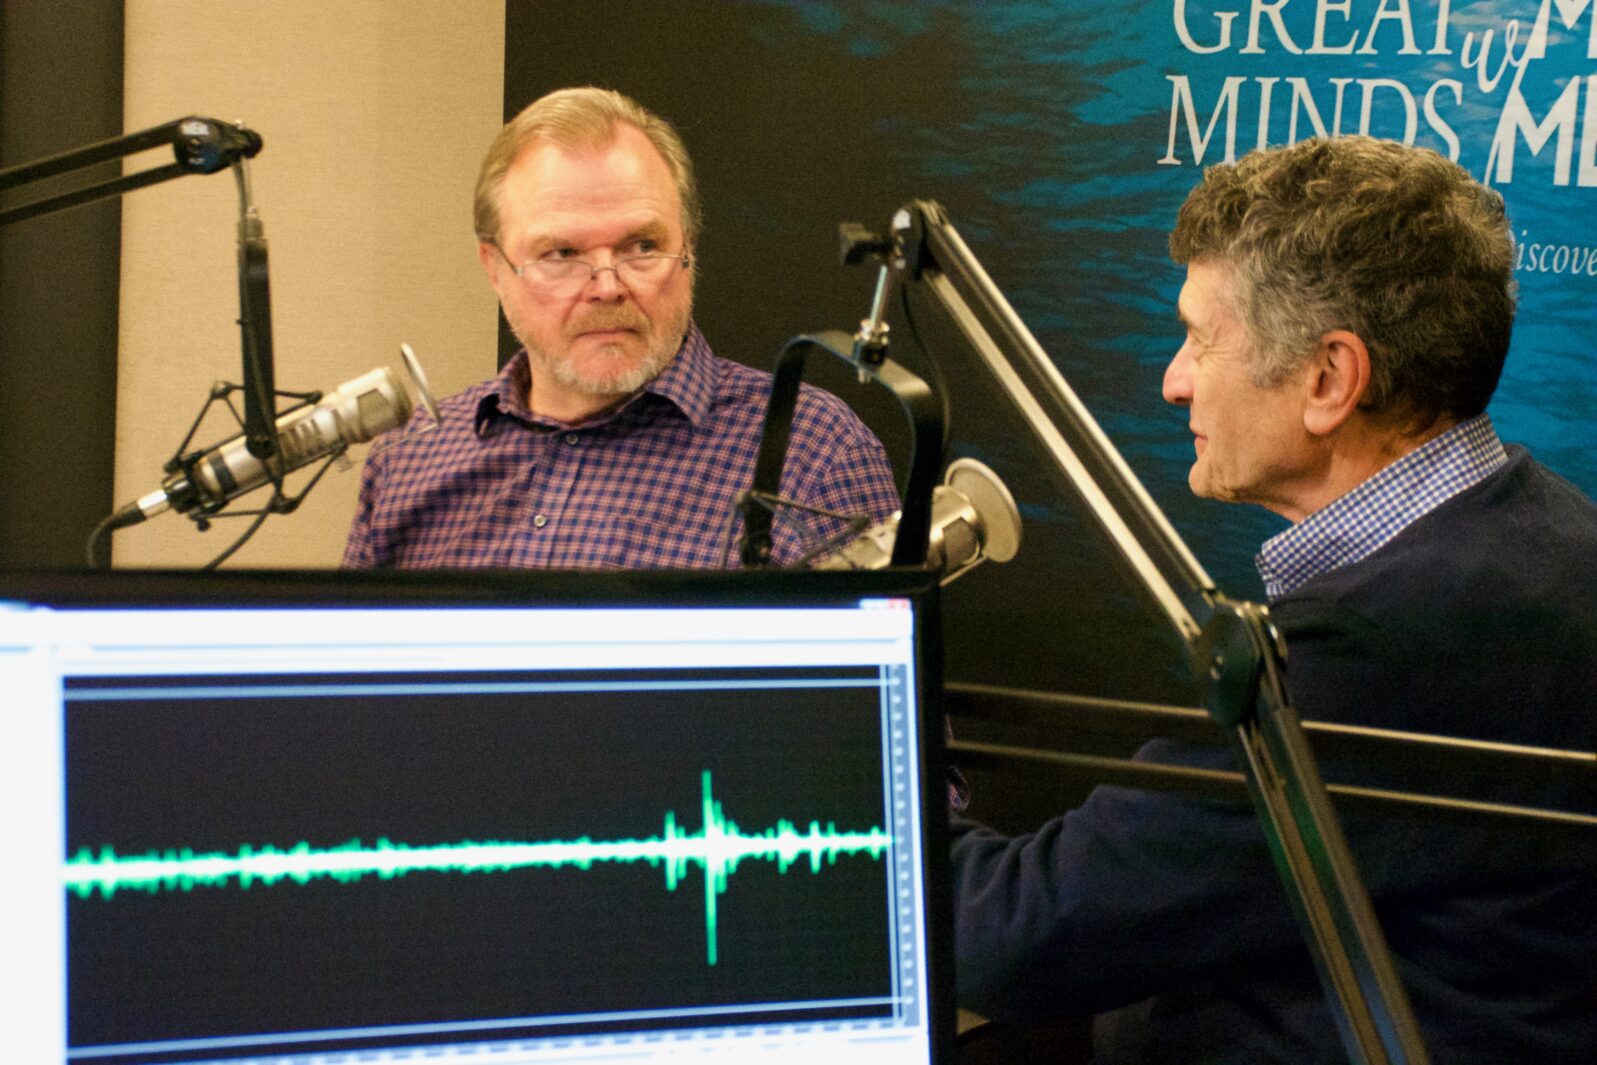 Robert J. Marks on Great Minds with Michael Medved